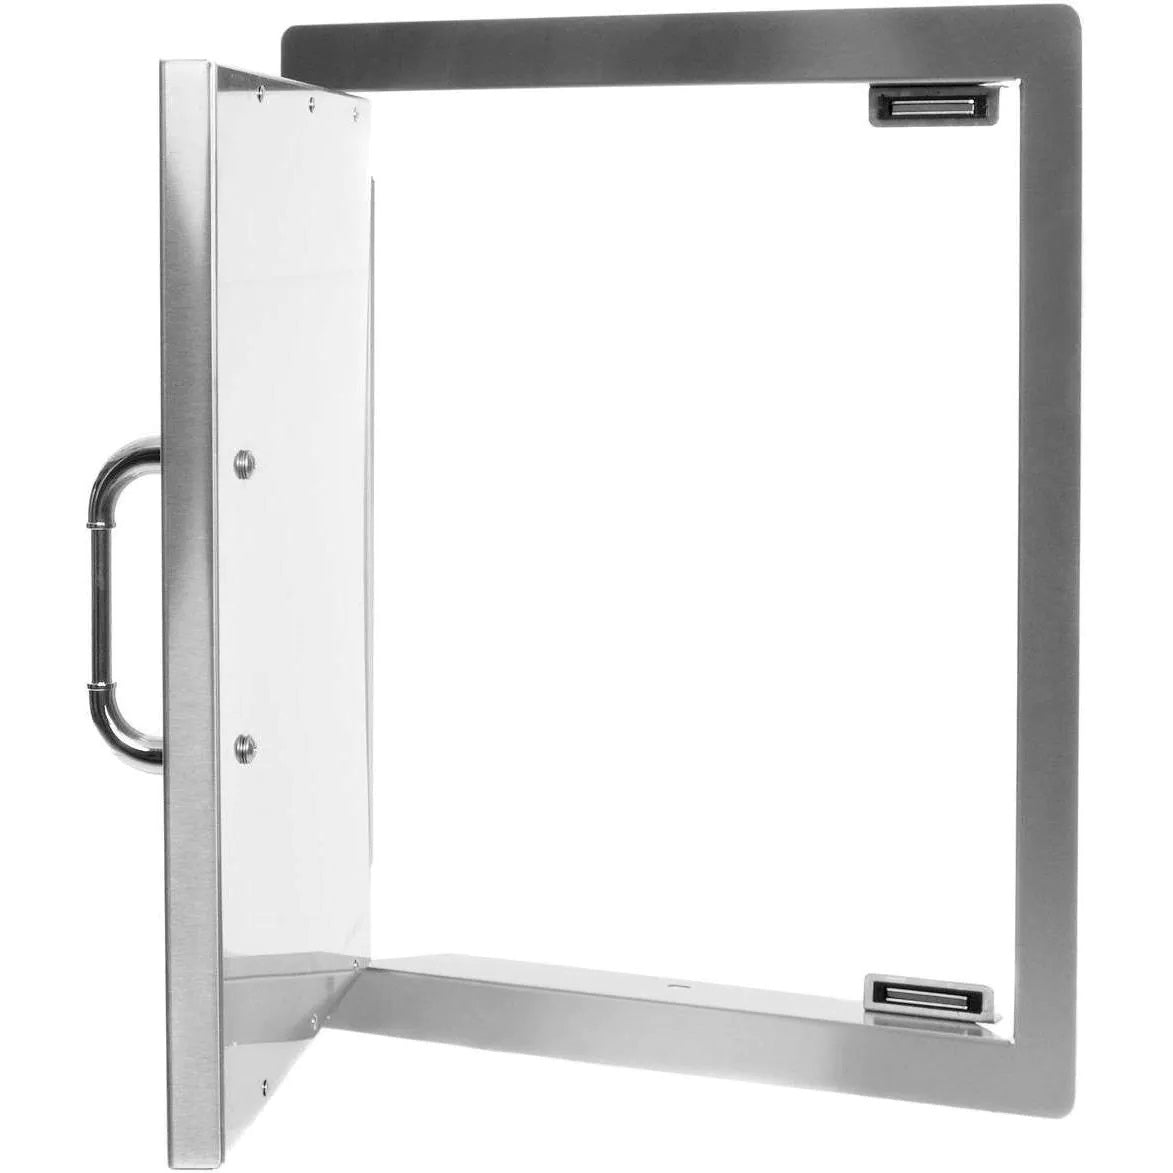 Bull 18-Inch Left Hinged Stainless Steel Single Access Door - Vertical